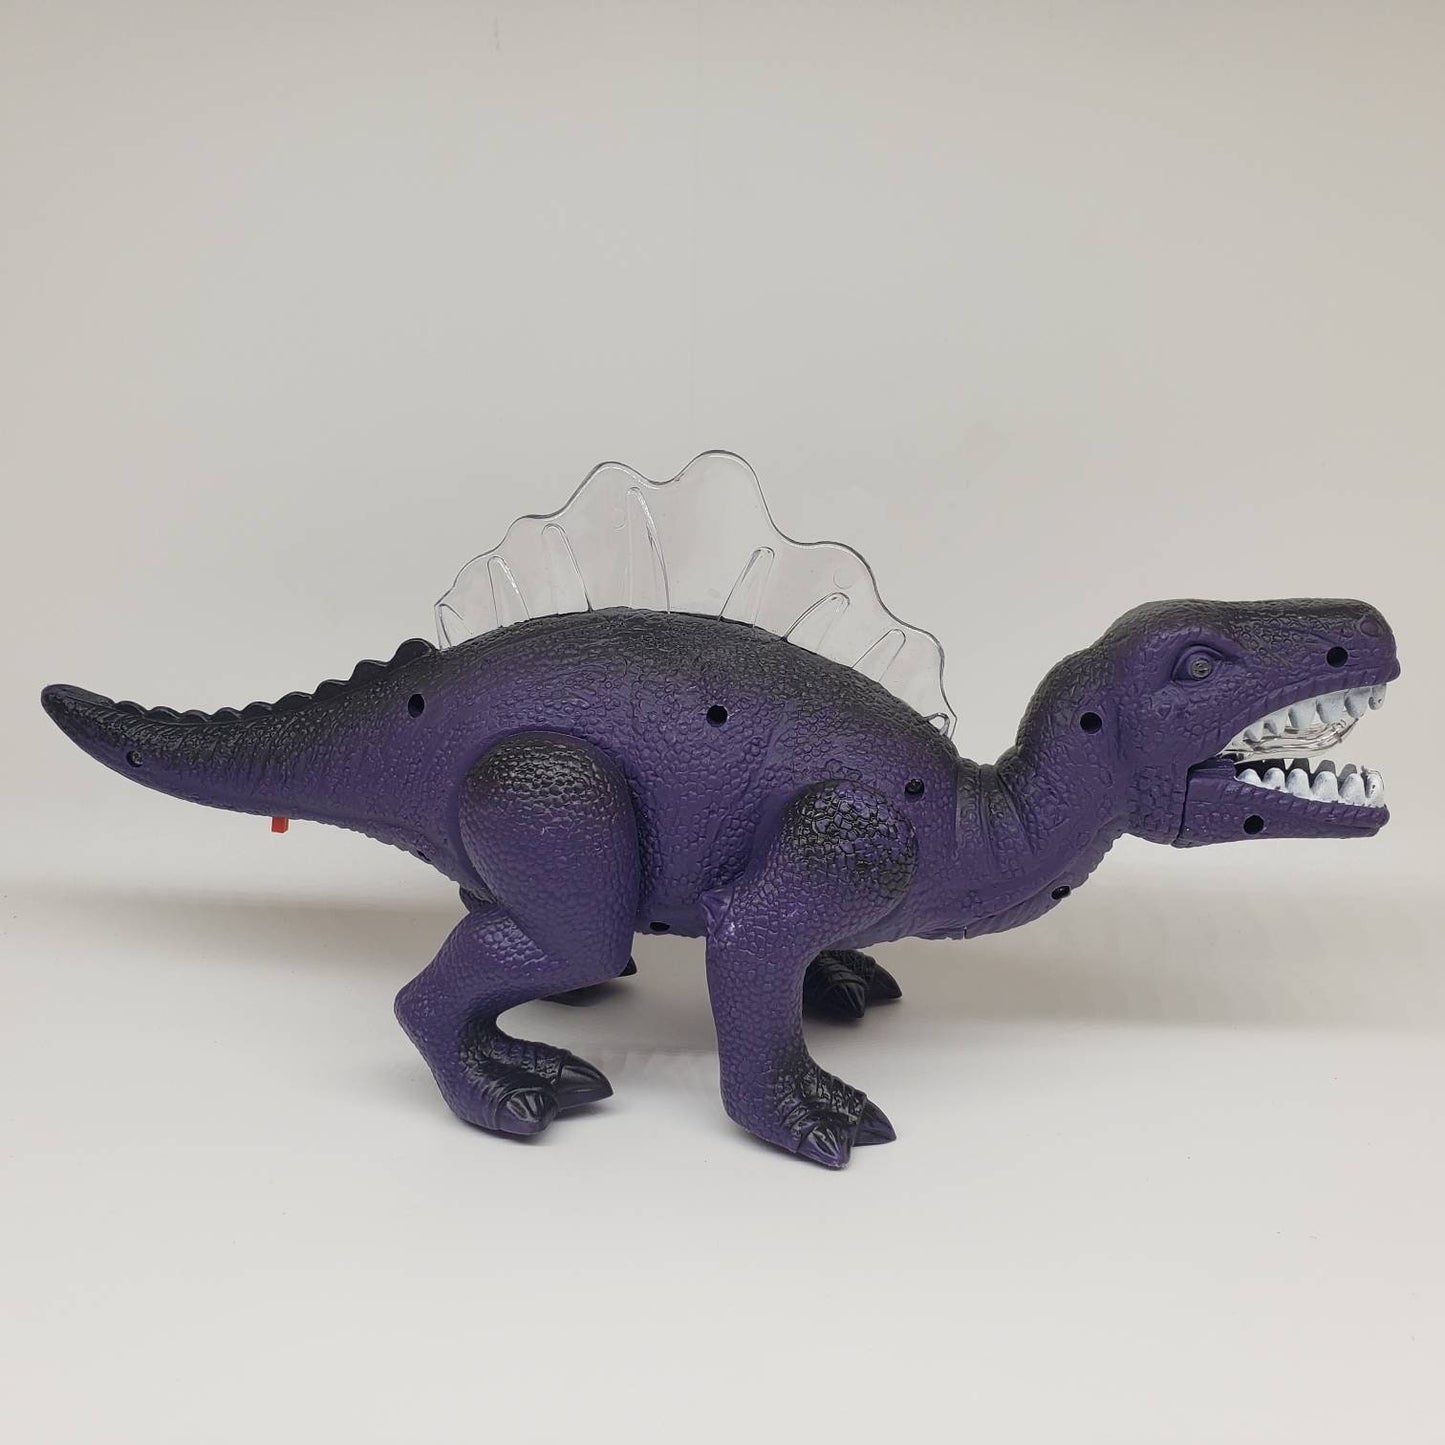 Spinosaurus Light and Sound Walking Figure Collectable Dinosaur Model Toy Perfect Birthday Gift